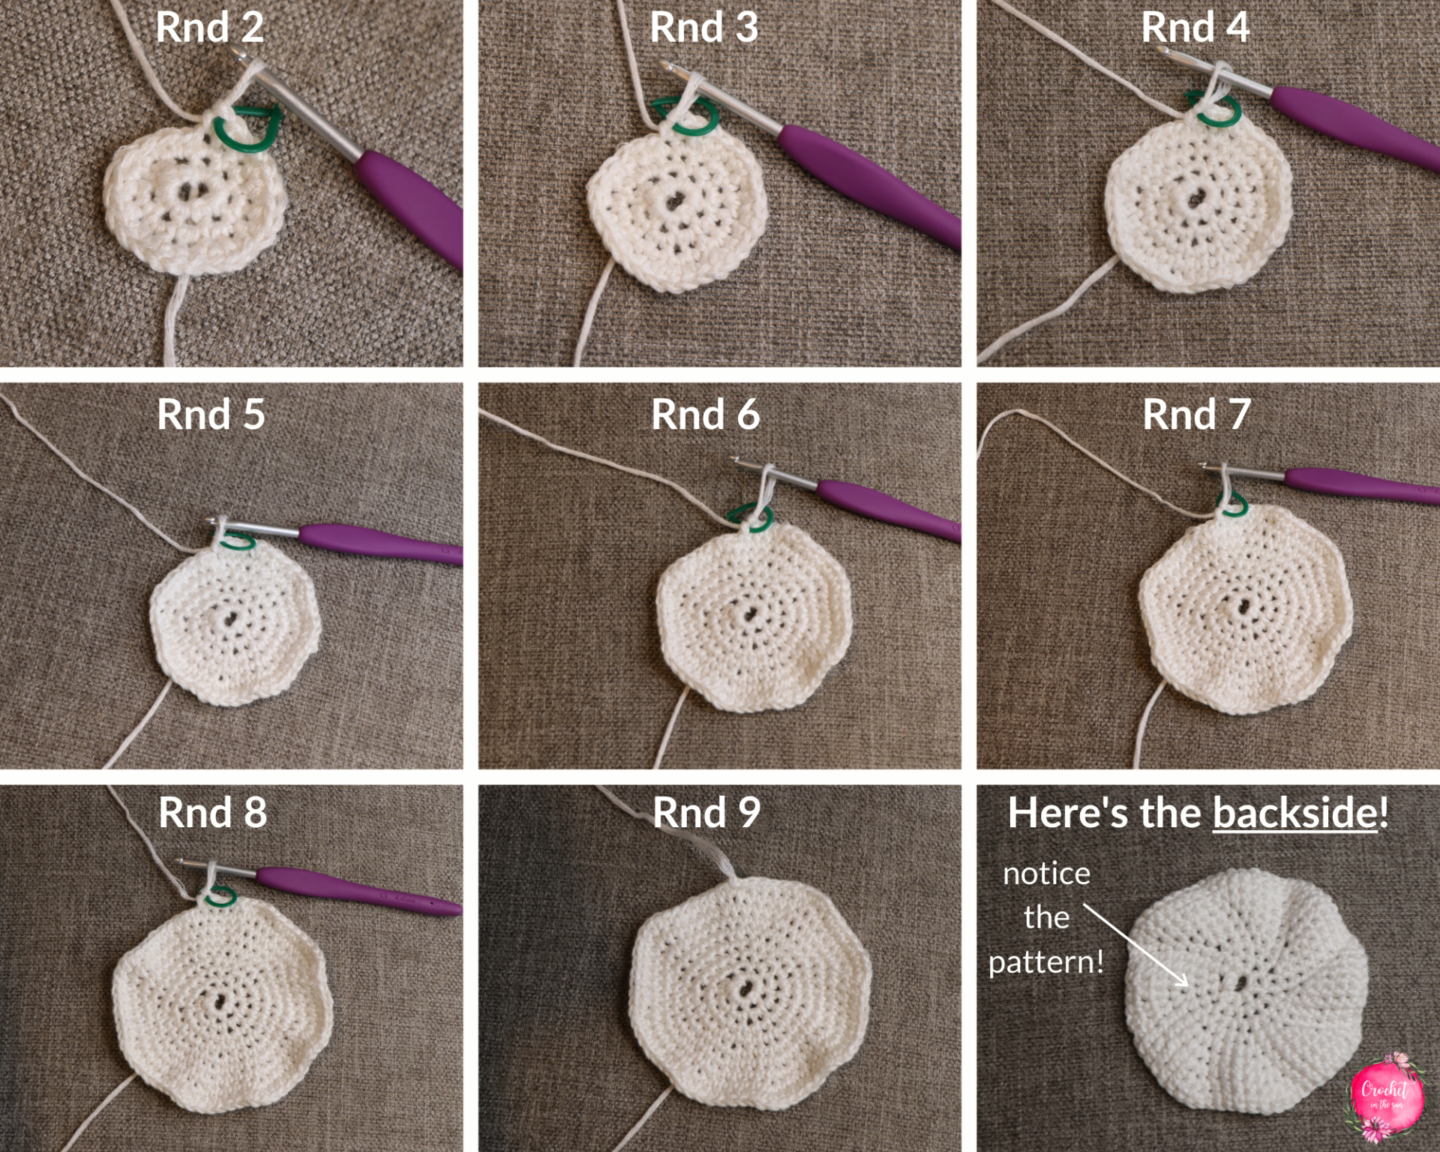 Photo tutorial for an easy crochet coaster pattern that is quick, beginner friendly, and beautiful.  Here are rounds 2-9.